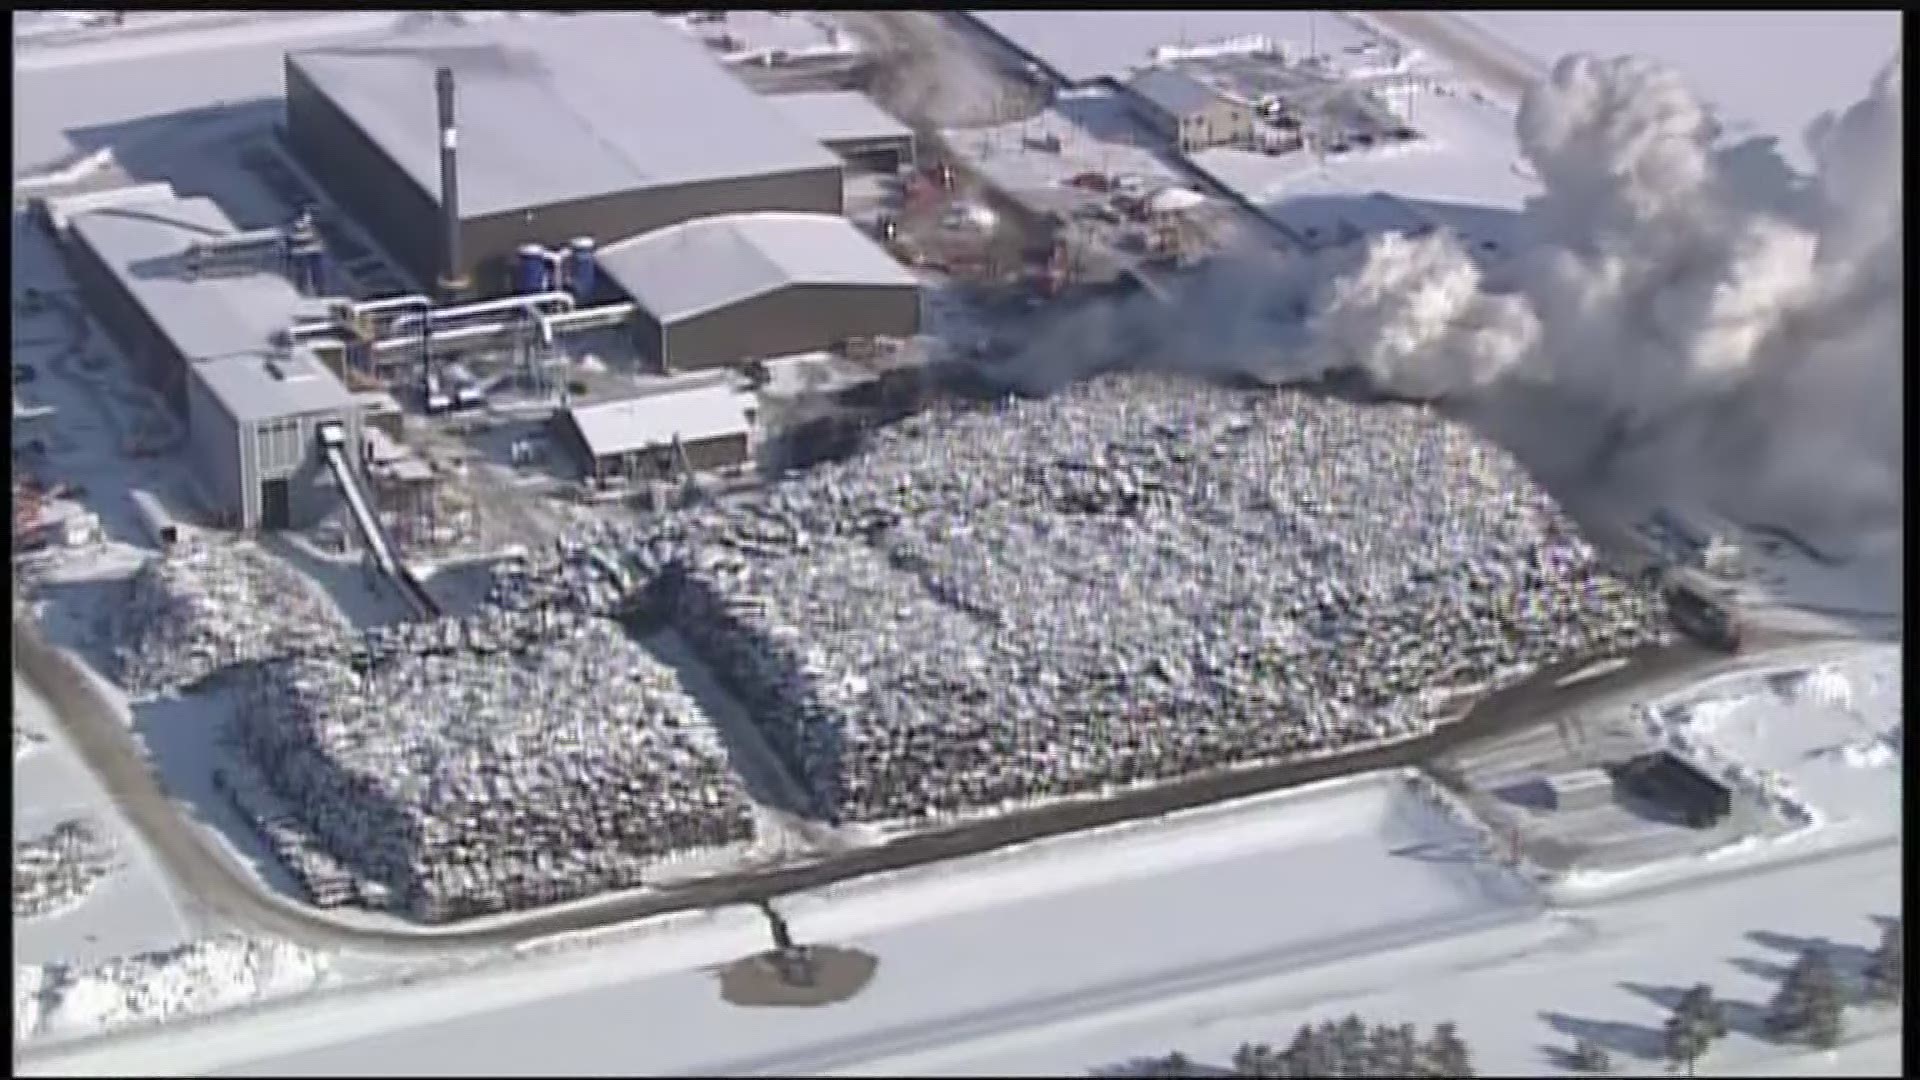 SKY 11 footage shows aerial view of crews fighting a fire that started in a pile of "crushed up vehicles" at Northern Metals Recycling Plant in Becker, Minnesota.